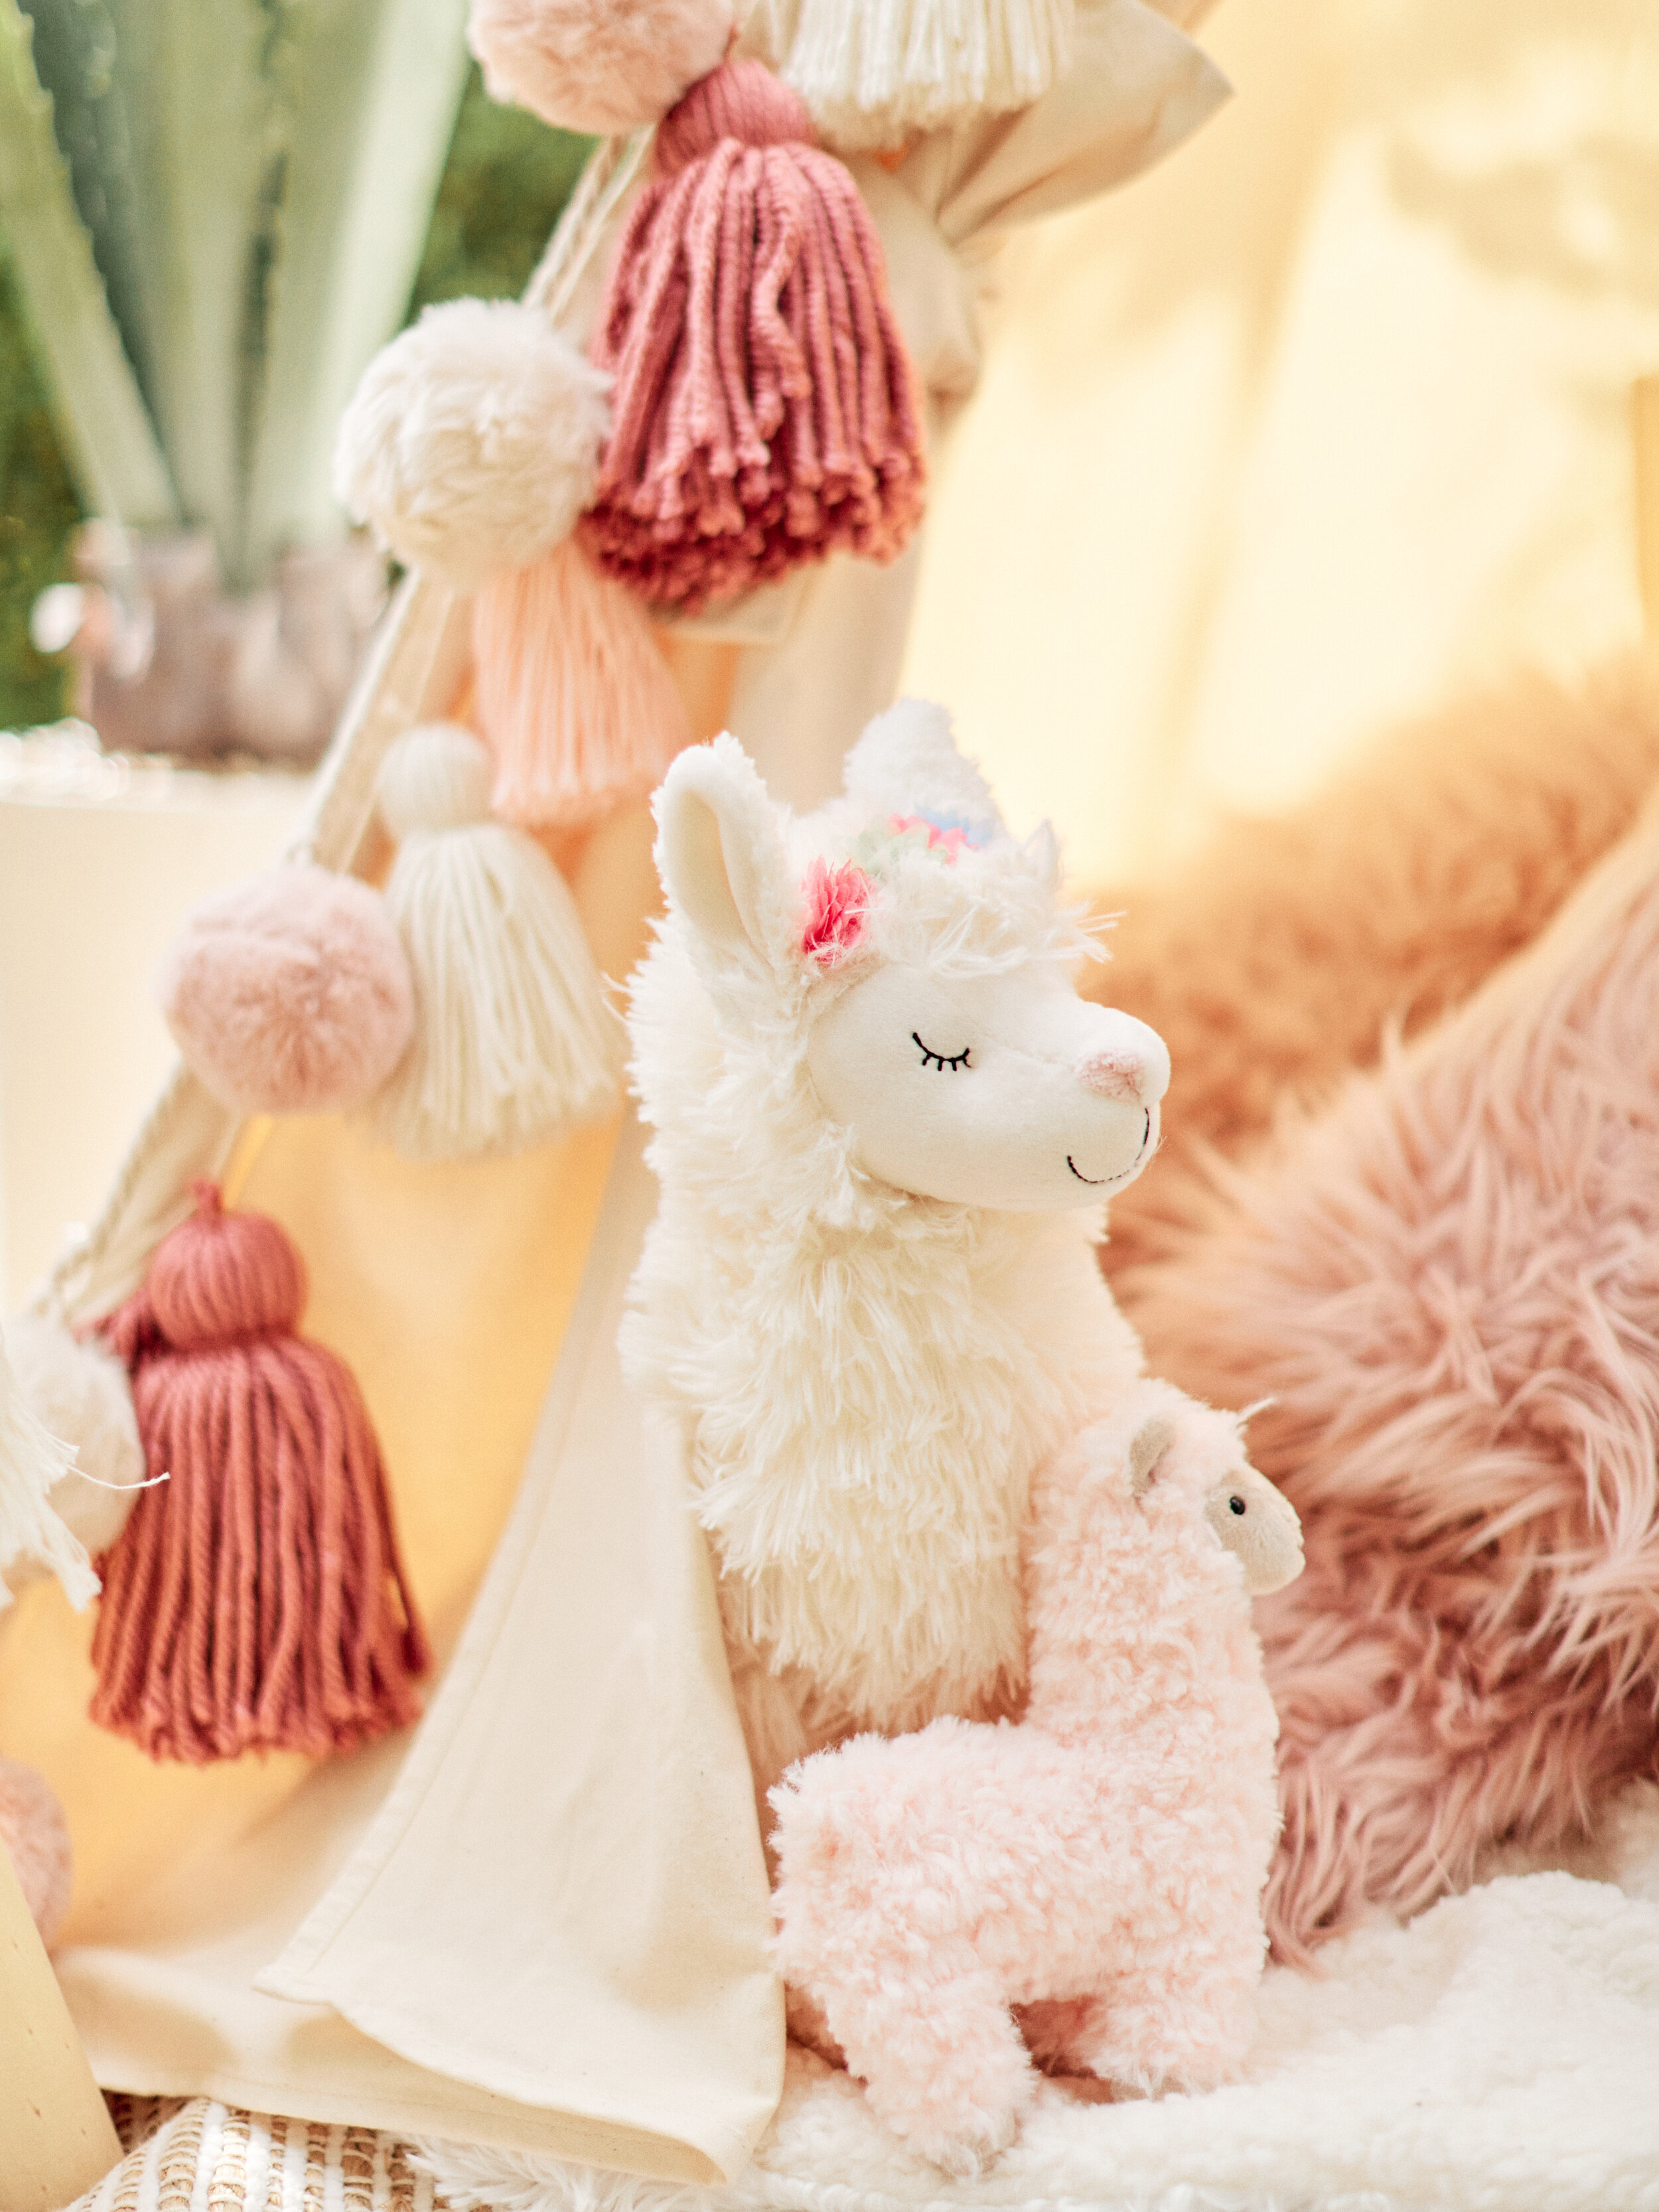 Llama stuffed animals for a llama party play tent - get details and more party inspiration now at minteventdesign.com!